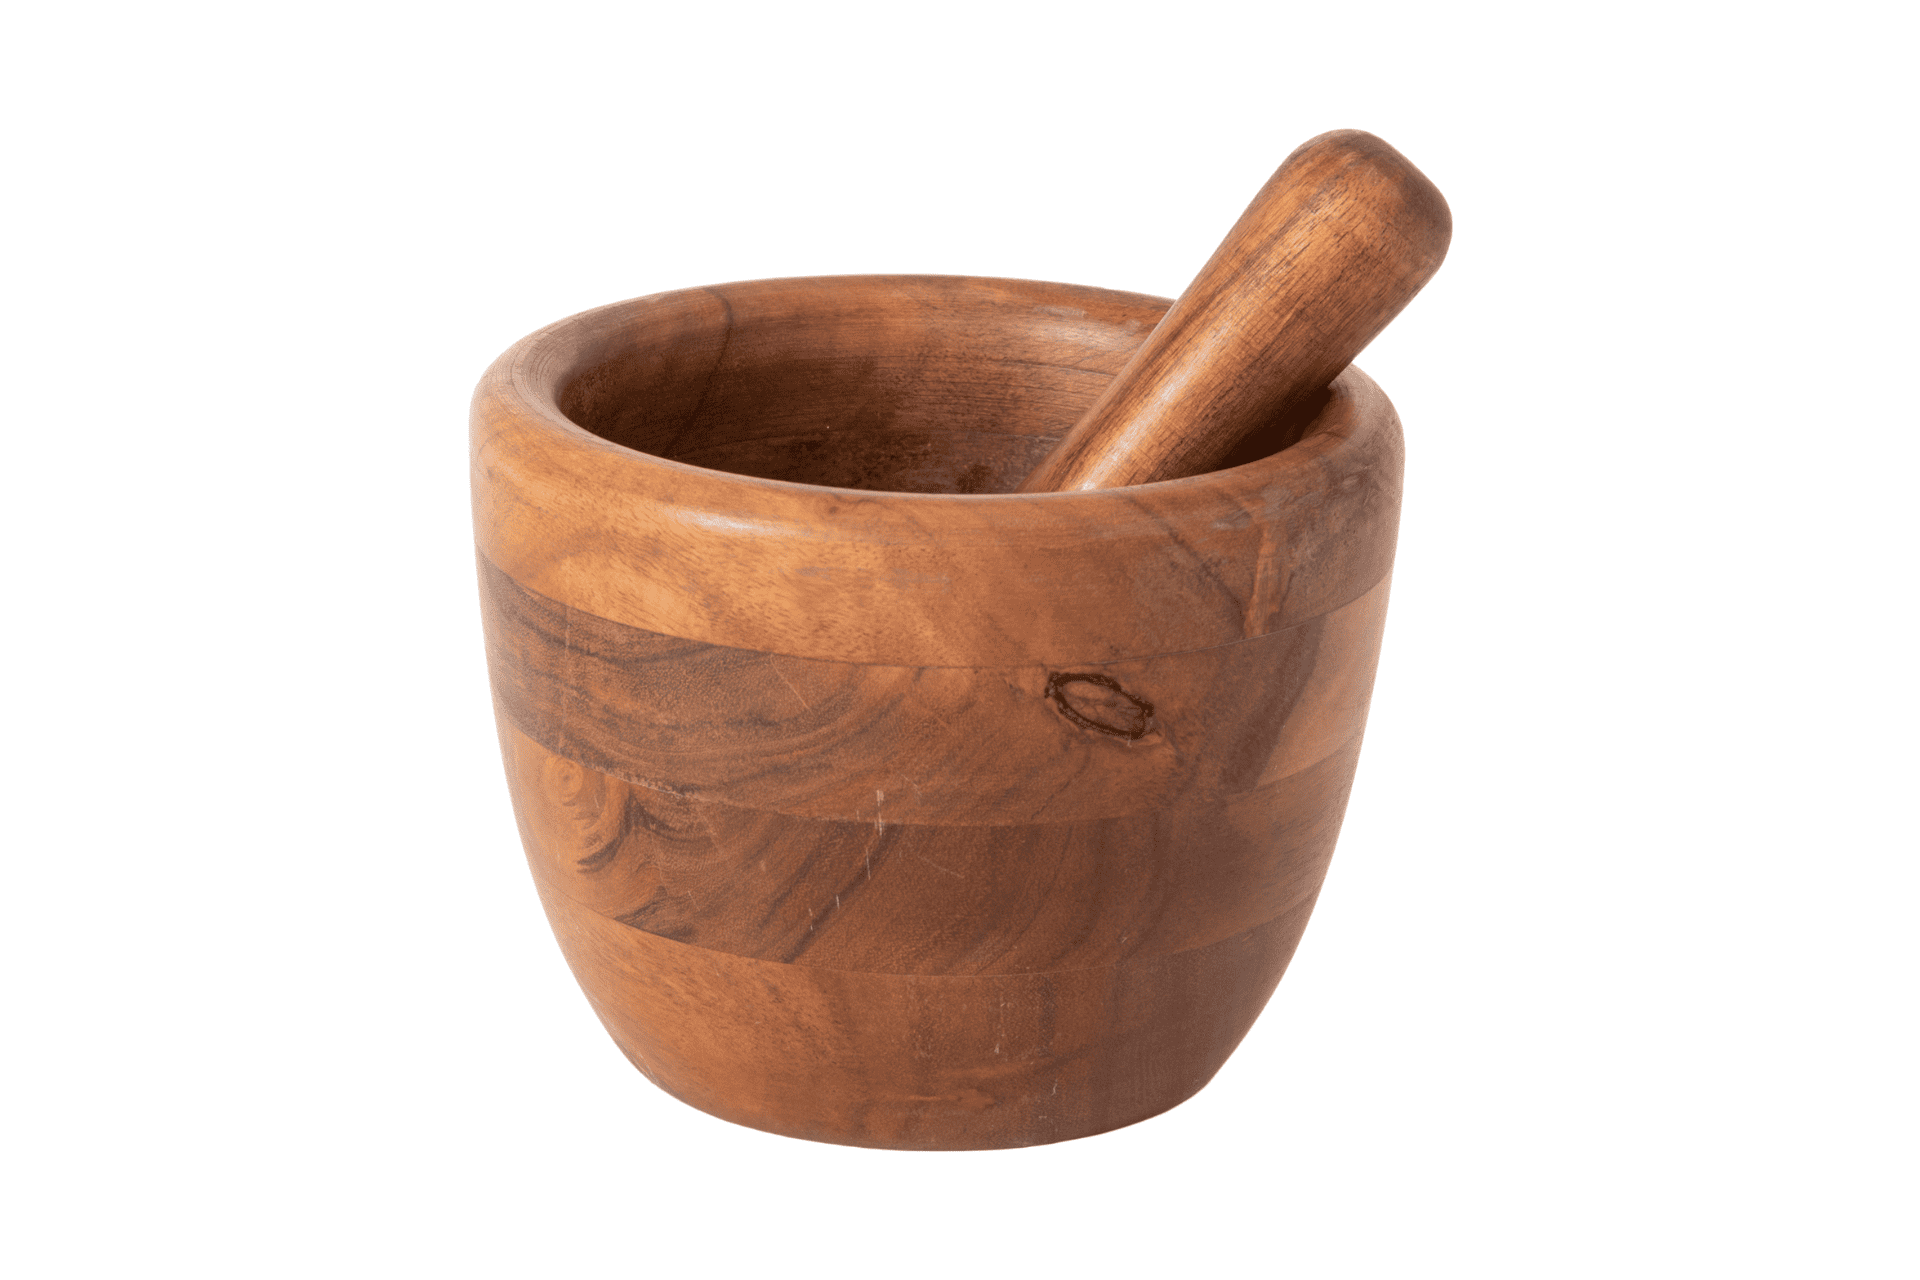 A wooden pestle and mortar